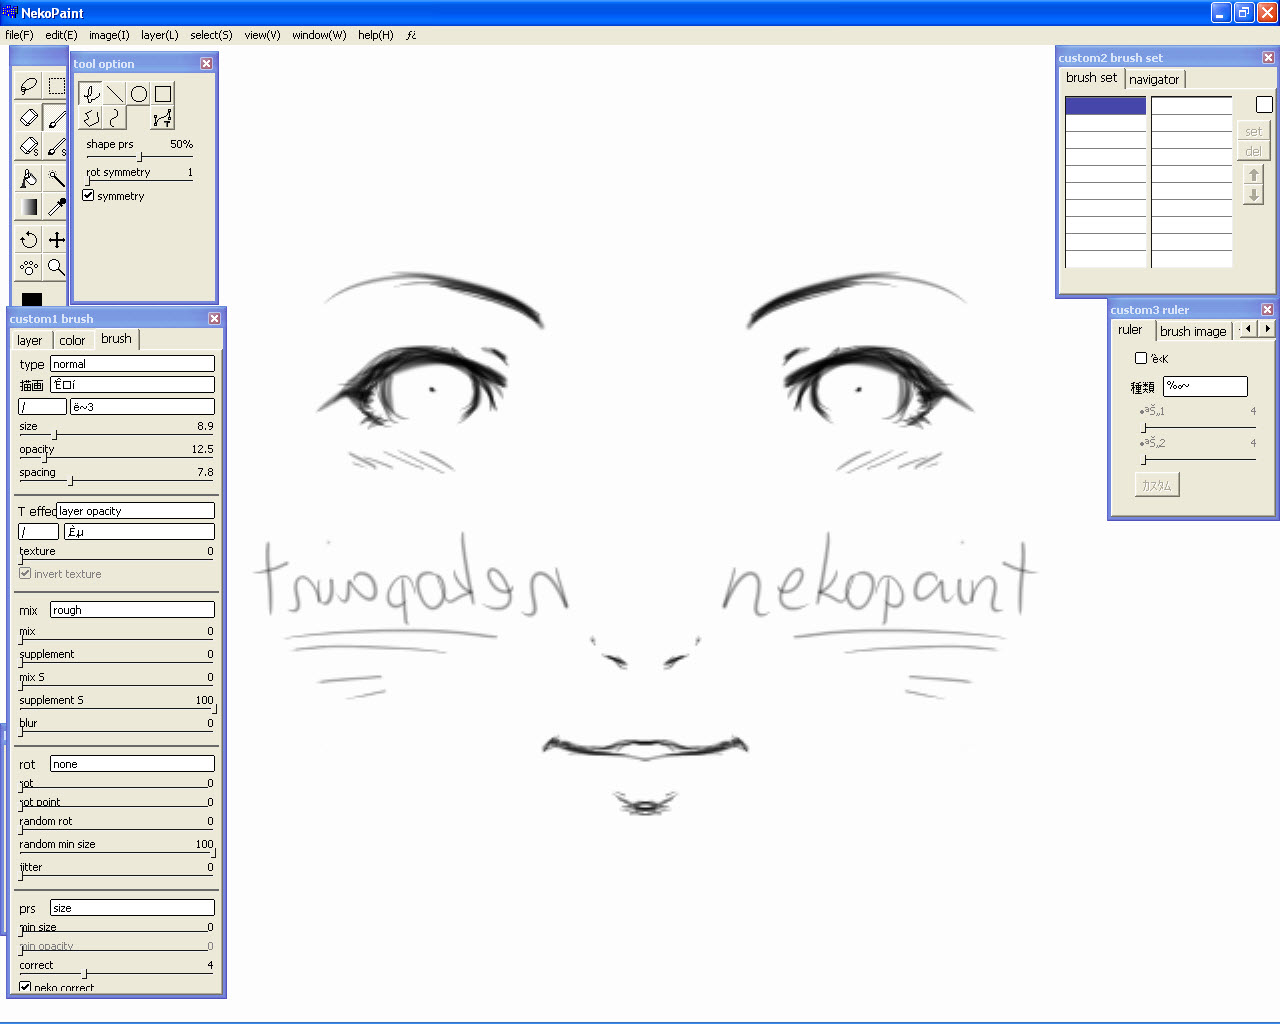 best drawing software for manga